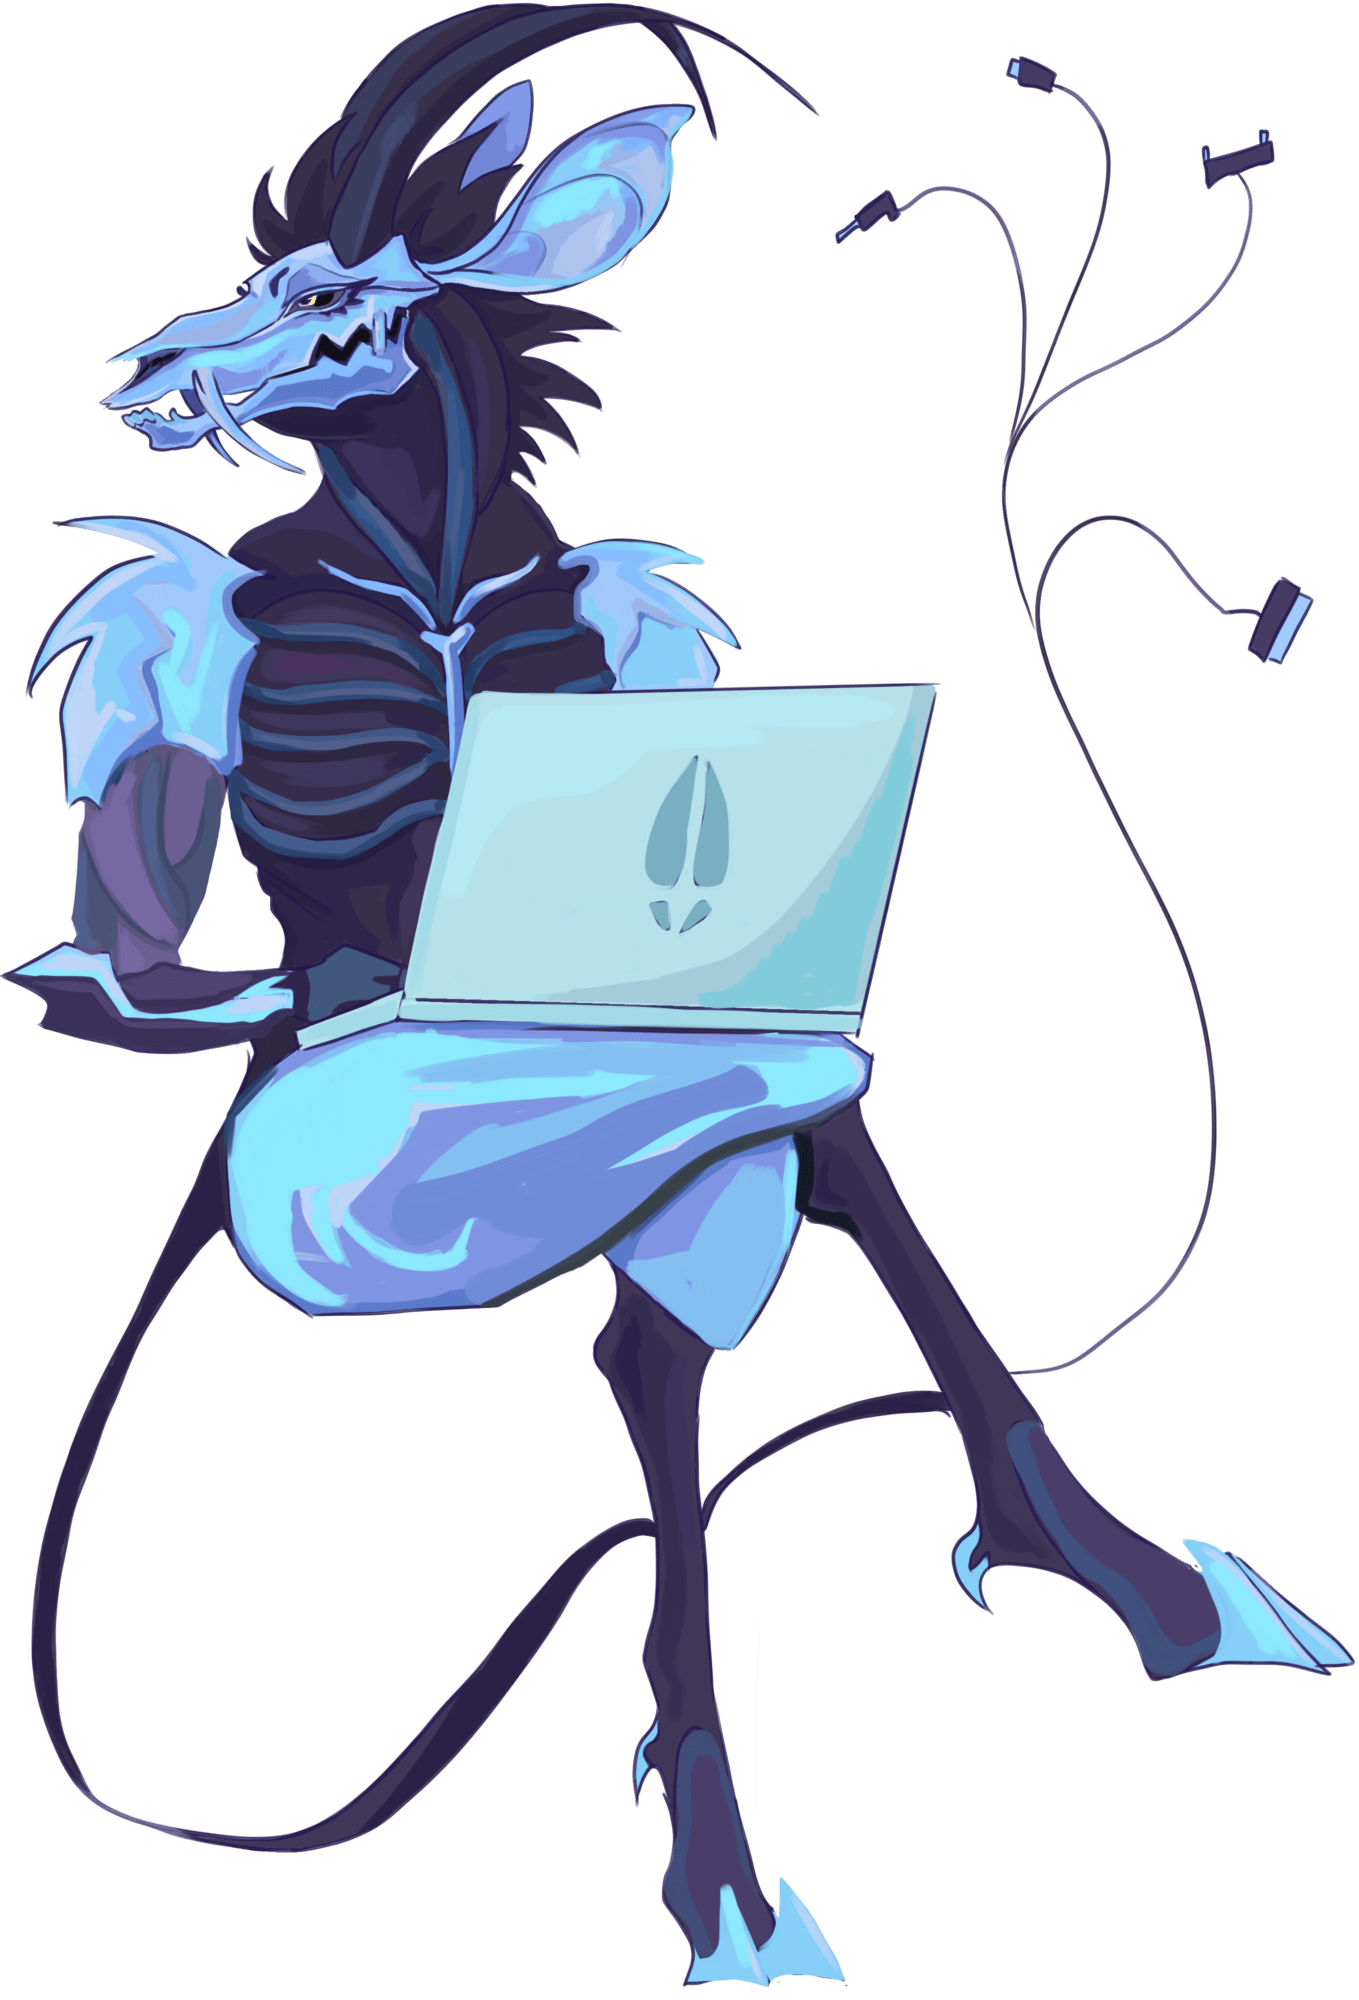 drawing of a blue cybernetic antelope with a tail made of various device chargers, they are sitting down with a computer in their lap